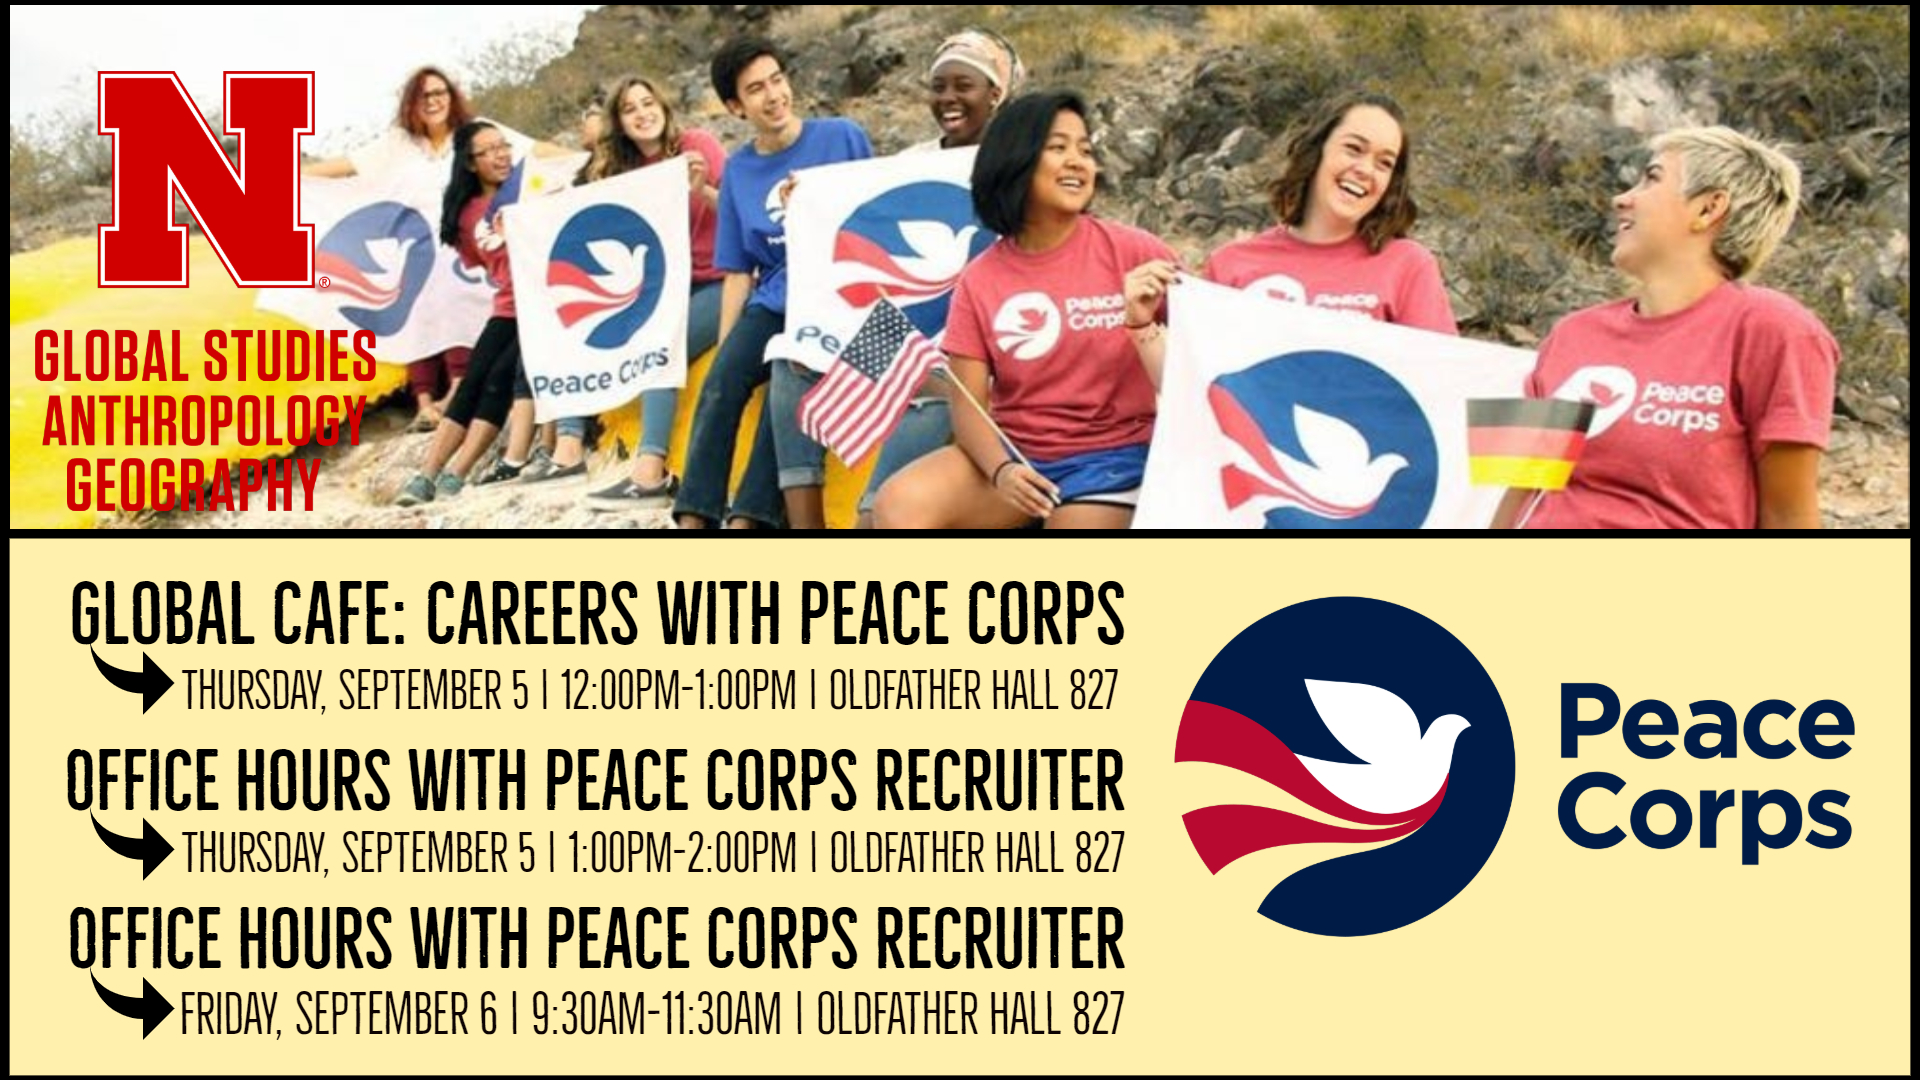 Upcoming Peace Corps Events Announce University Of Nebraska Lincoln